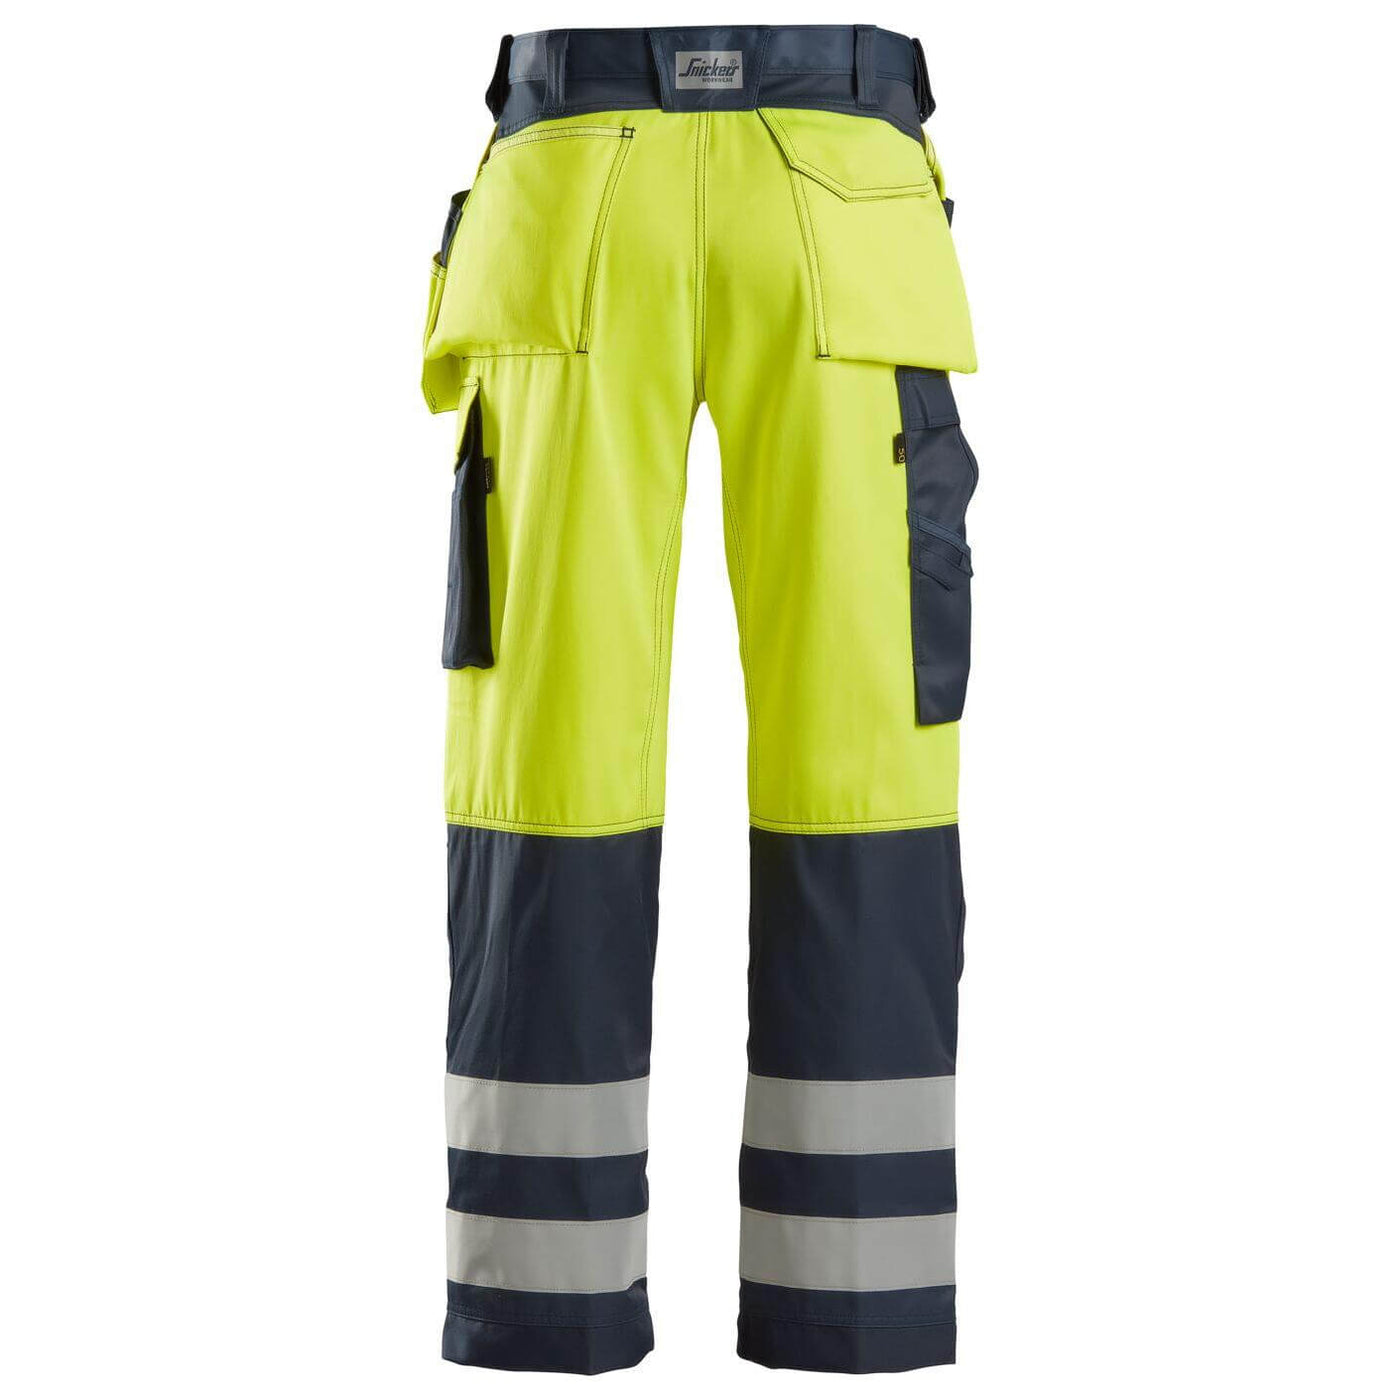 Snickers 3233 Hi Vis Loose Fit Holster Pocket Trousers Class 2 Hi Vis Yellow Navy Blue back #colour_hi-vis-yellow-navy-blue